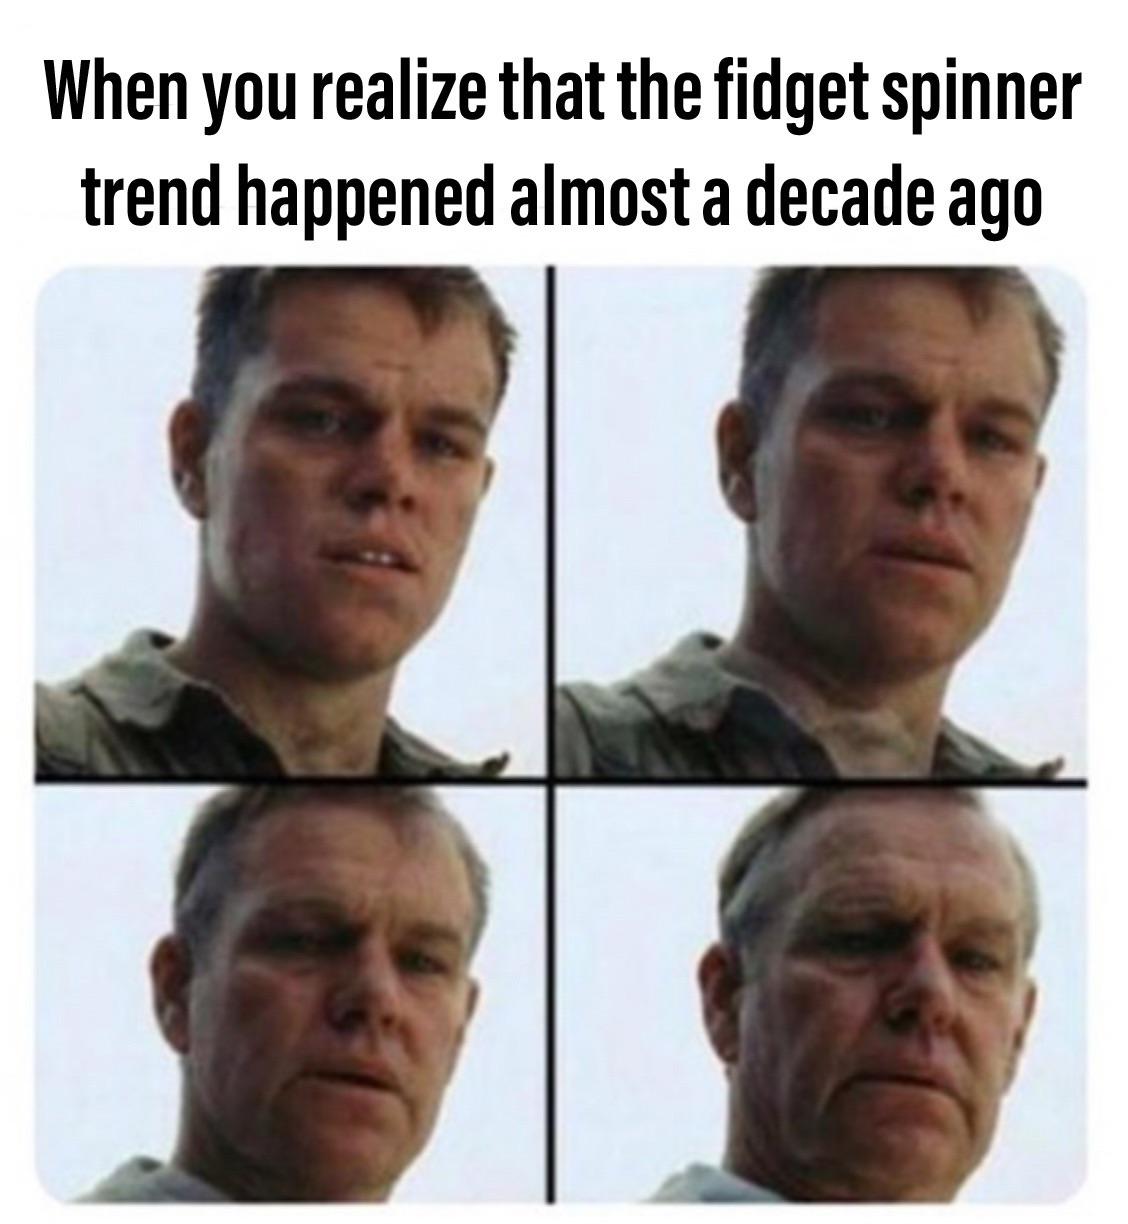 fresh memes - fresh dank memes 2022 - When you realize that the fidget spinner trend happened almost a decade ago